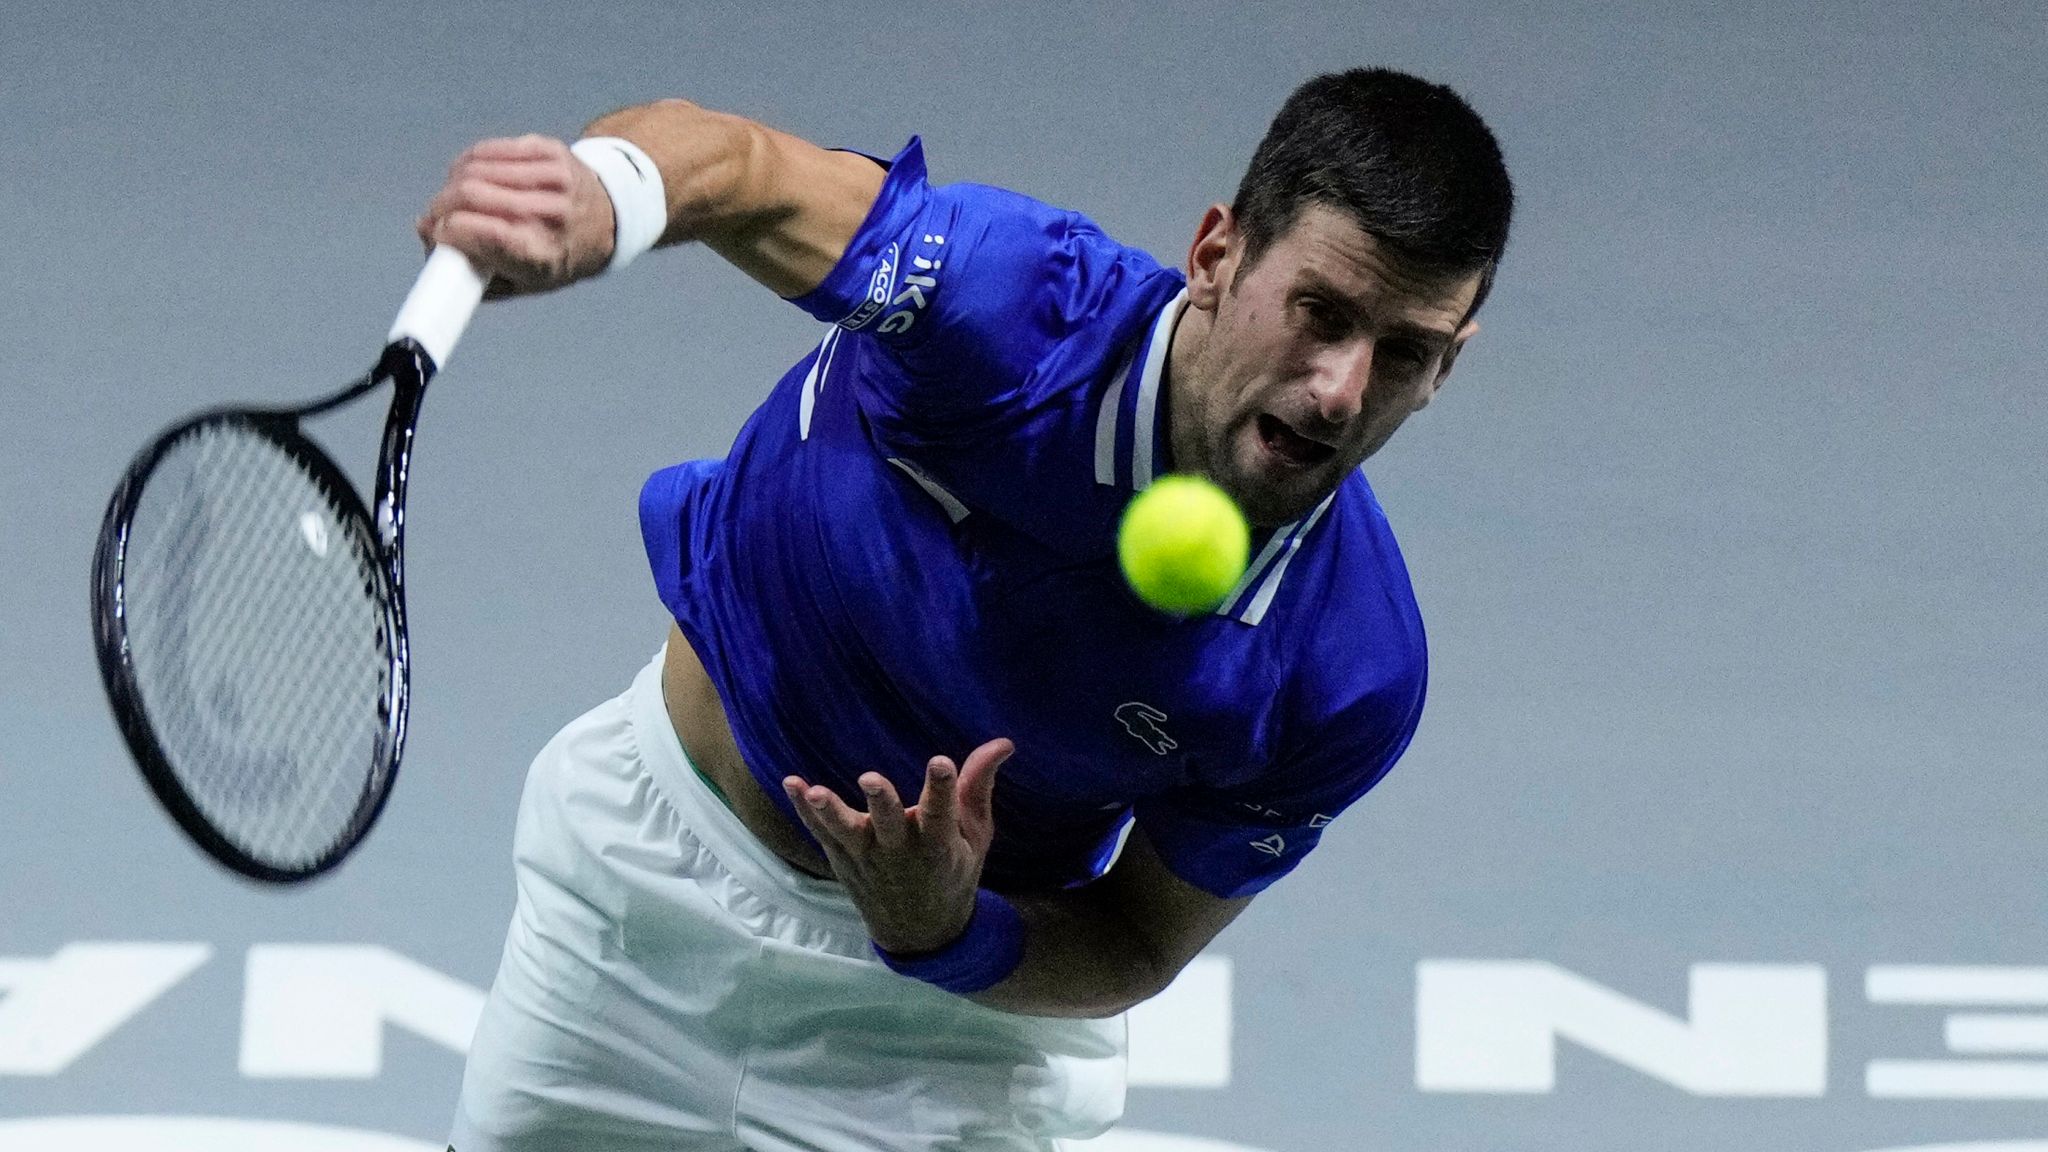 Novak Djokovic withdraws from ATP Cup event in Sydney - raising further doubts over Australian Open participation | World News | Sky News